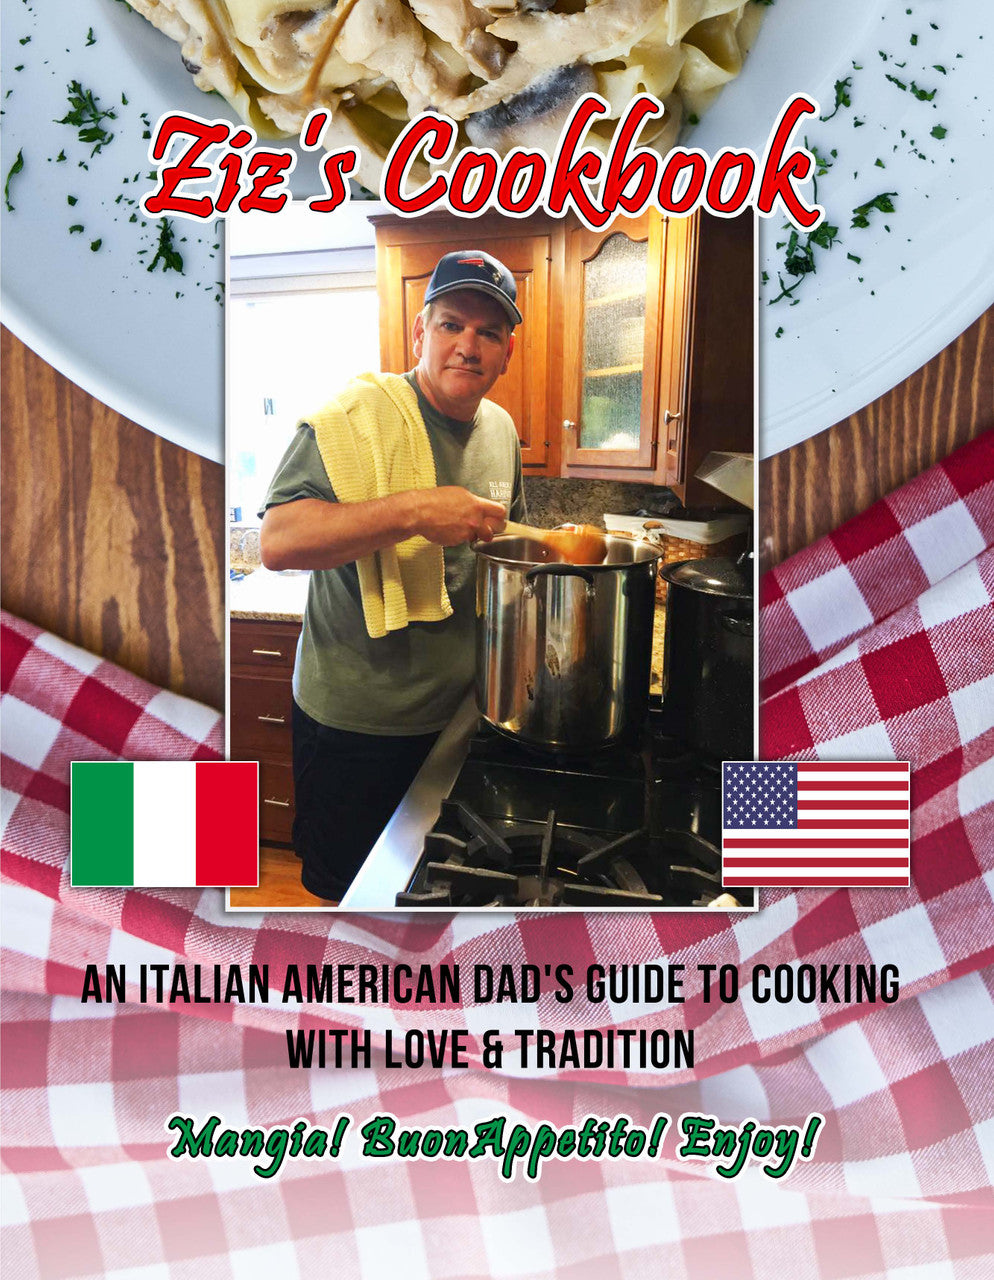 Ziz's Cook Book: An Italian American Dad's Guide To Cooking With Love & Tradition: Mangia! Buon Appetito! Enjoy!